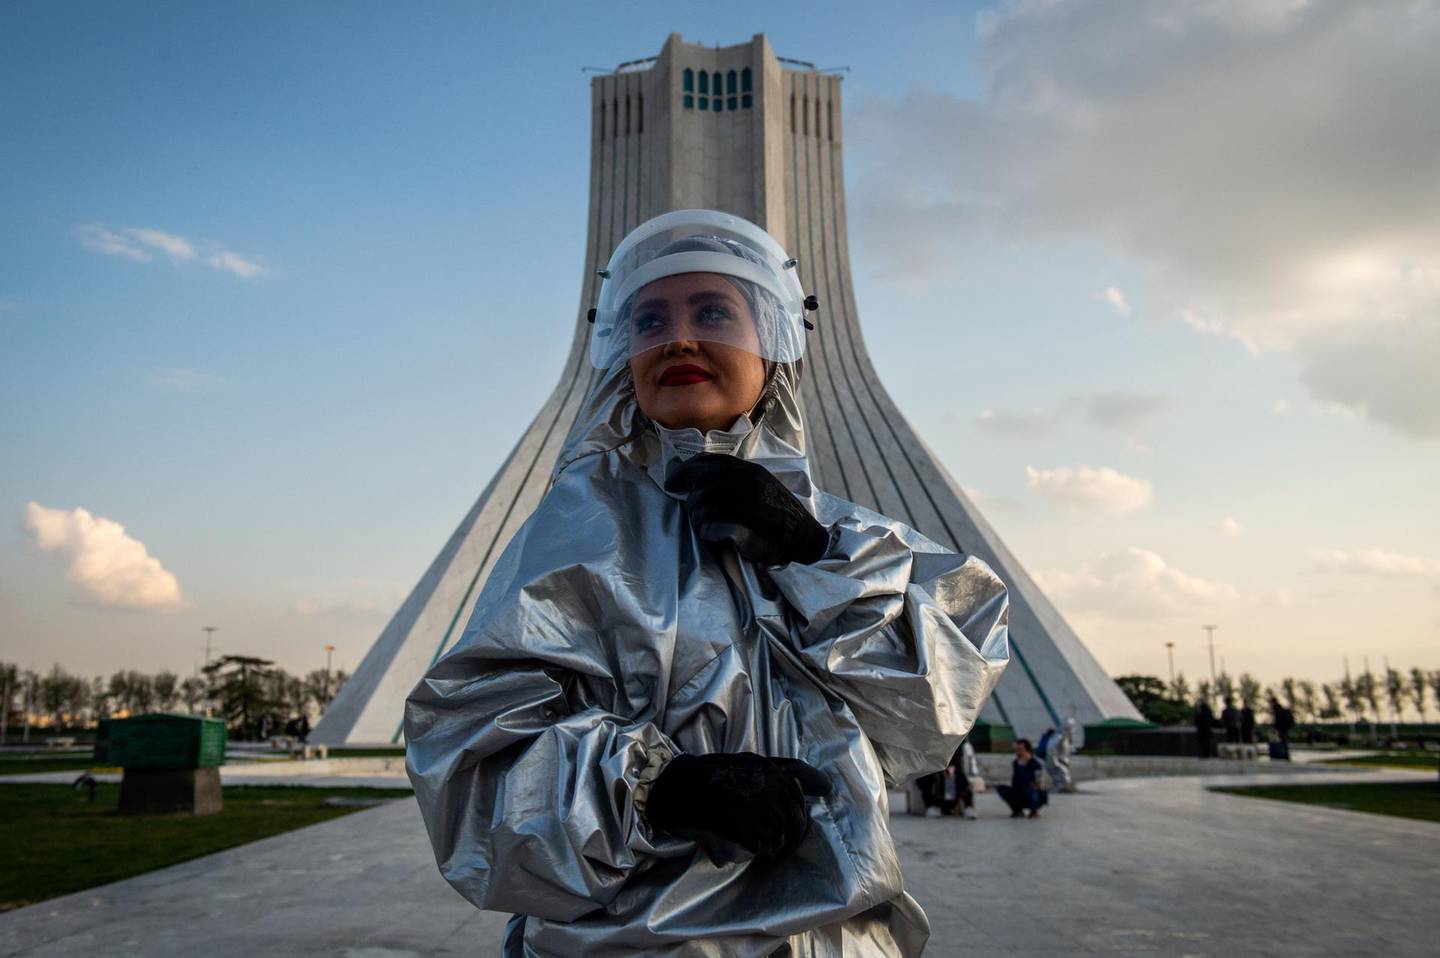 A volunteer wearing protective personal equipment (PPE) takes part in disinfecting operations on Azadi Square in Tehran, Iran, on Friday, March 27, 2020. Iranian President Hassan Rouhani said on Saturday that the government has allocated an additional 100 trillion tomans to address the spread the coronavirus in the country. Photographer: Ali Mohammadi/Bloomberg